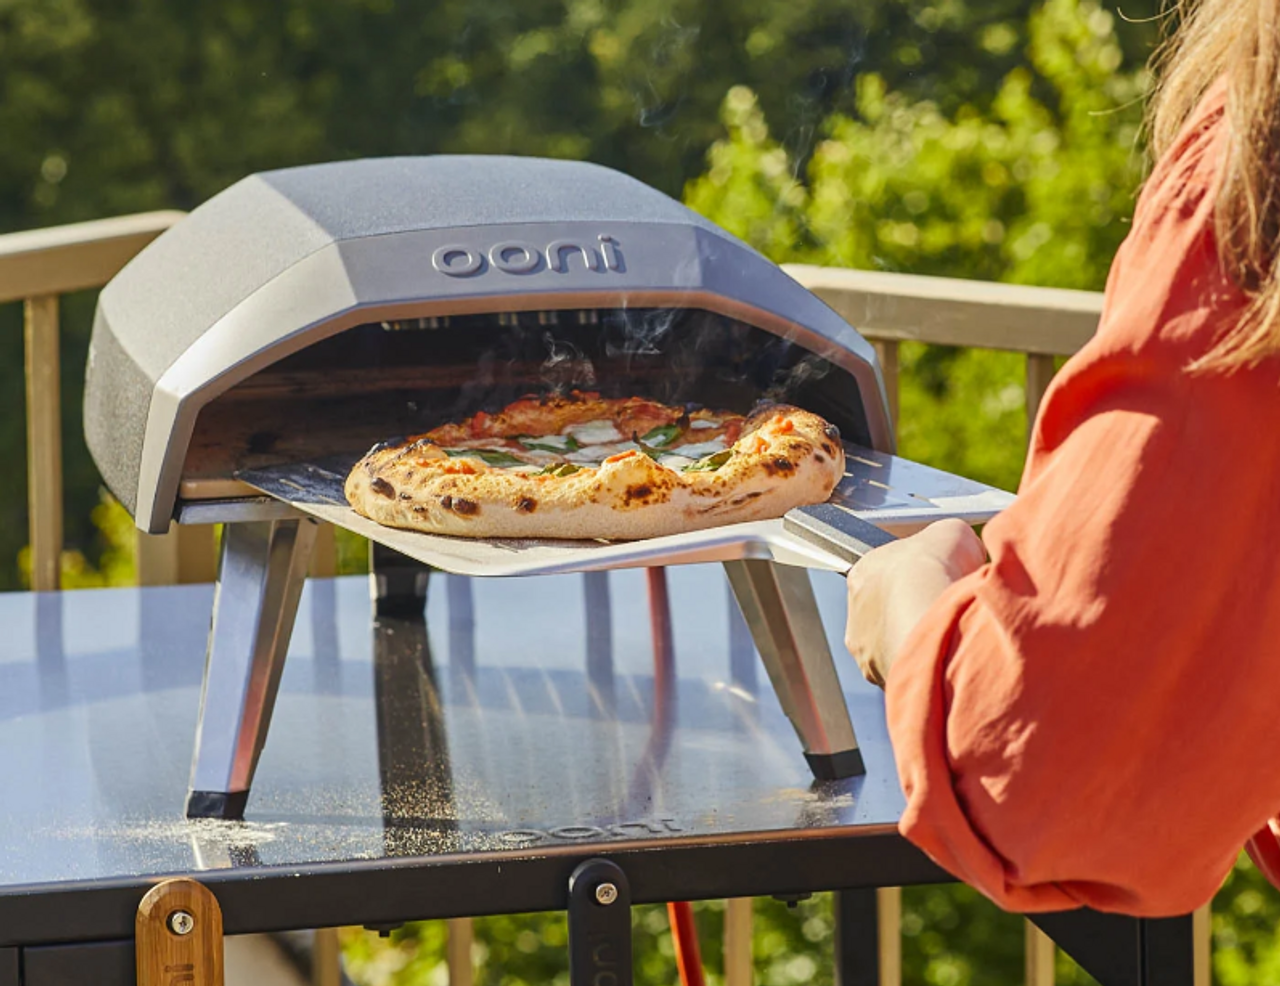 Pizza Ovens - Your Guide To Pizza